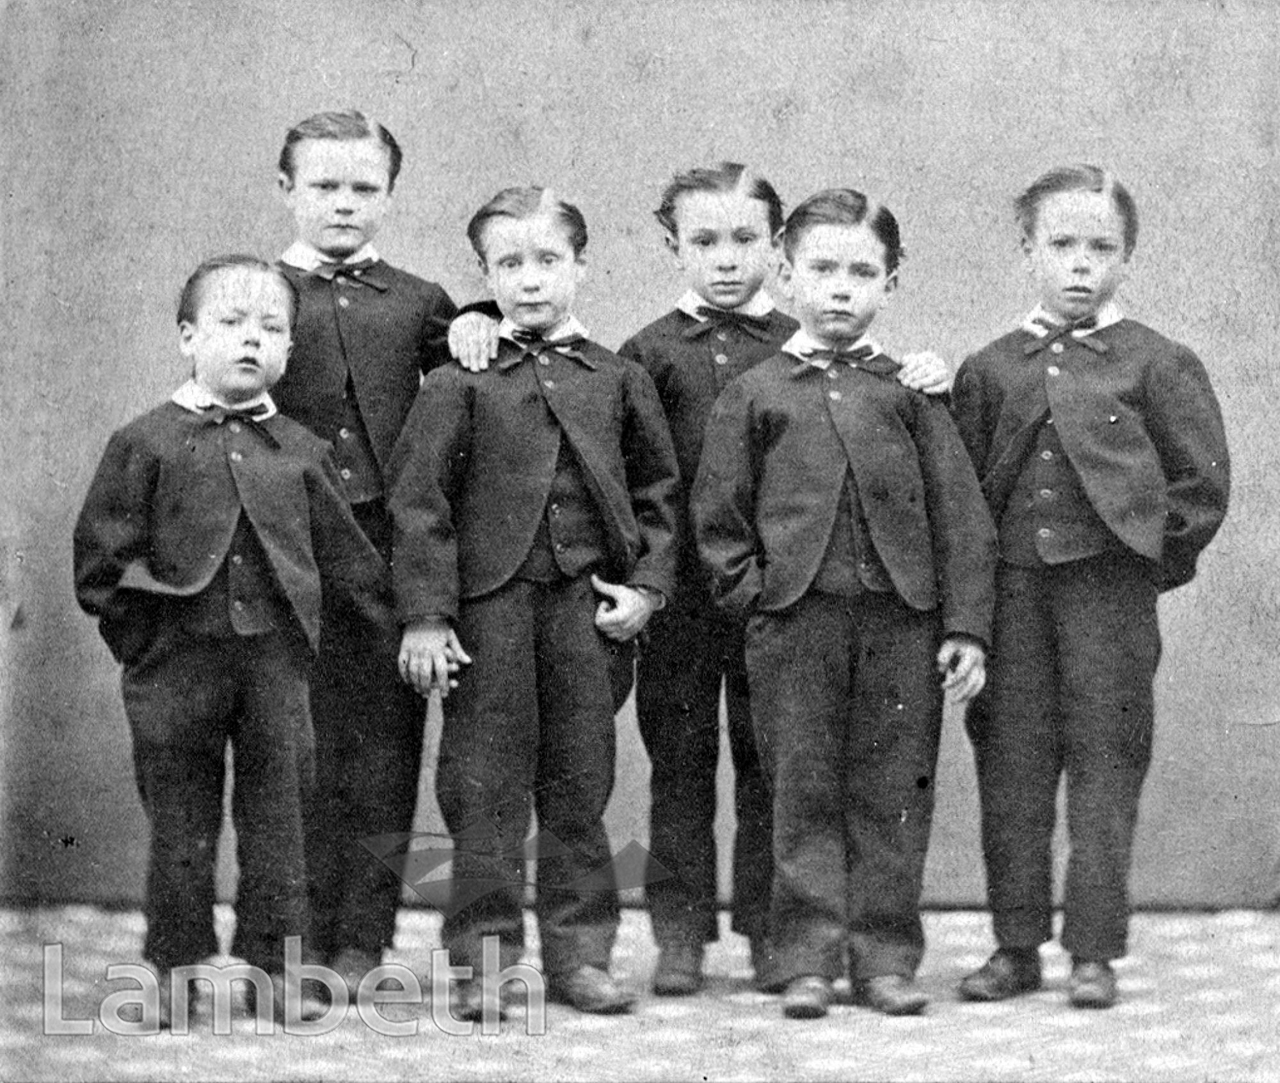 STOCKWELL ORPHANAGE: THE FIRST SIX BOYS